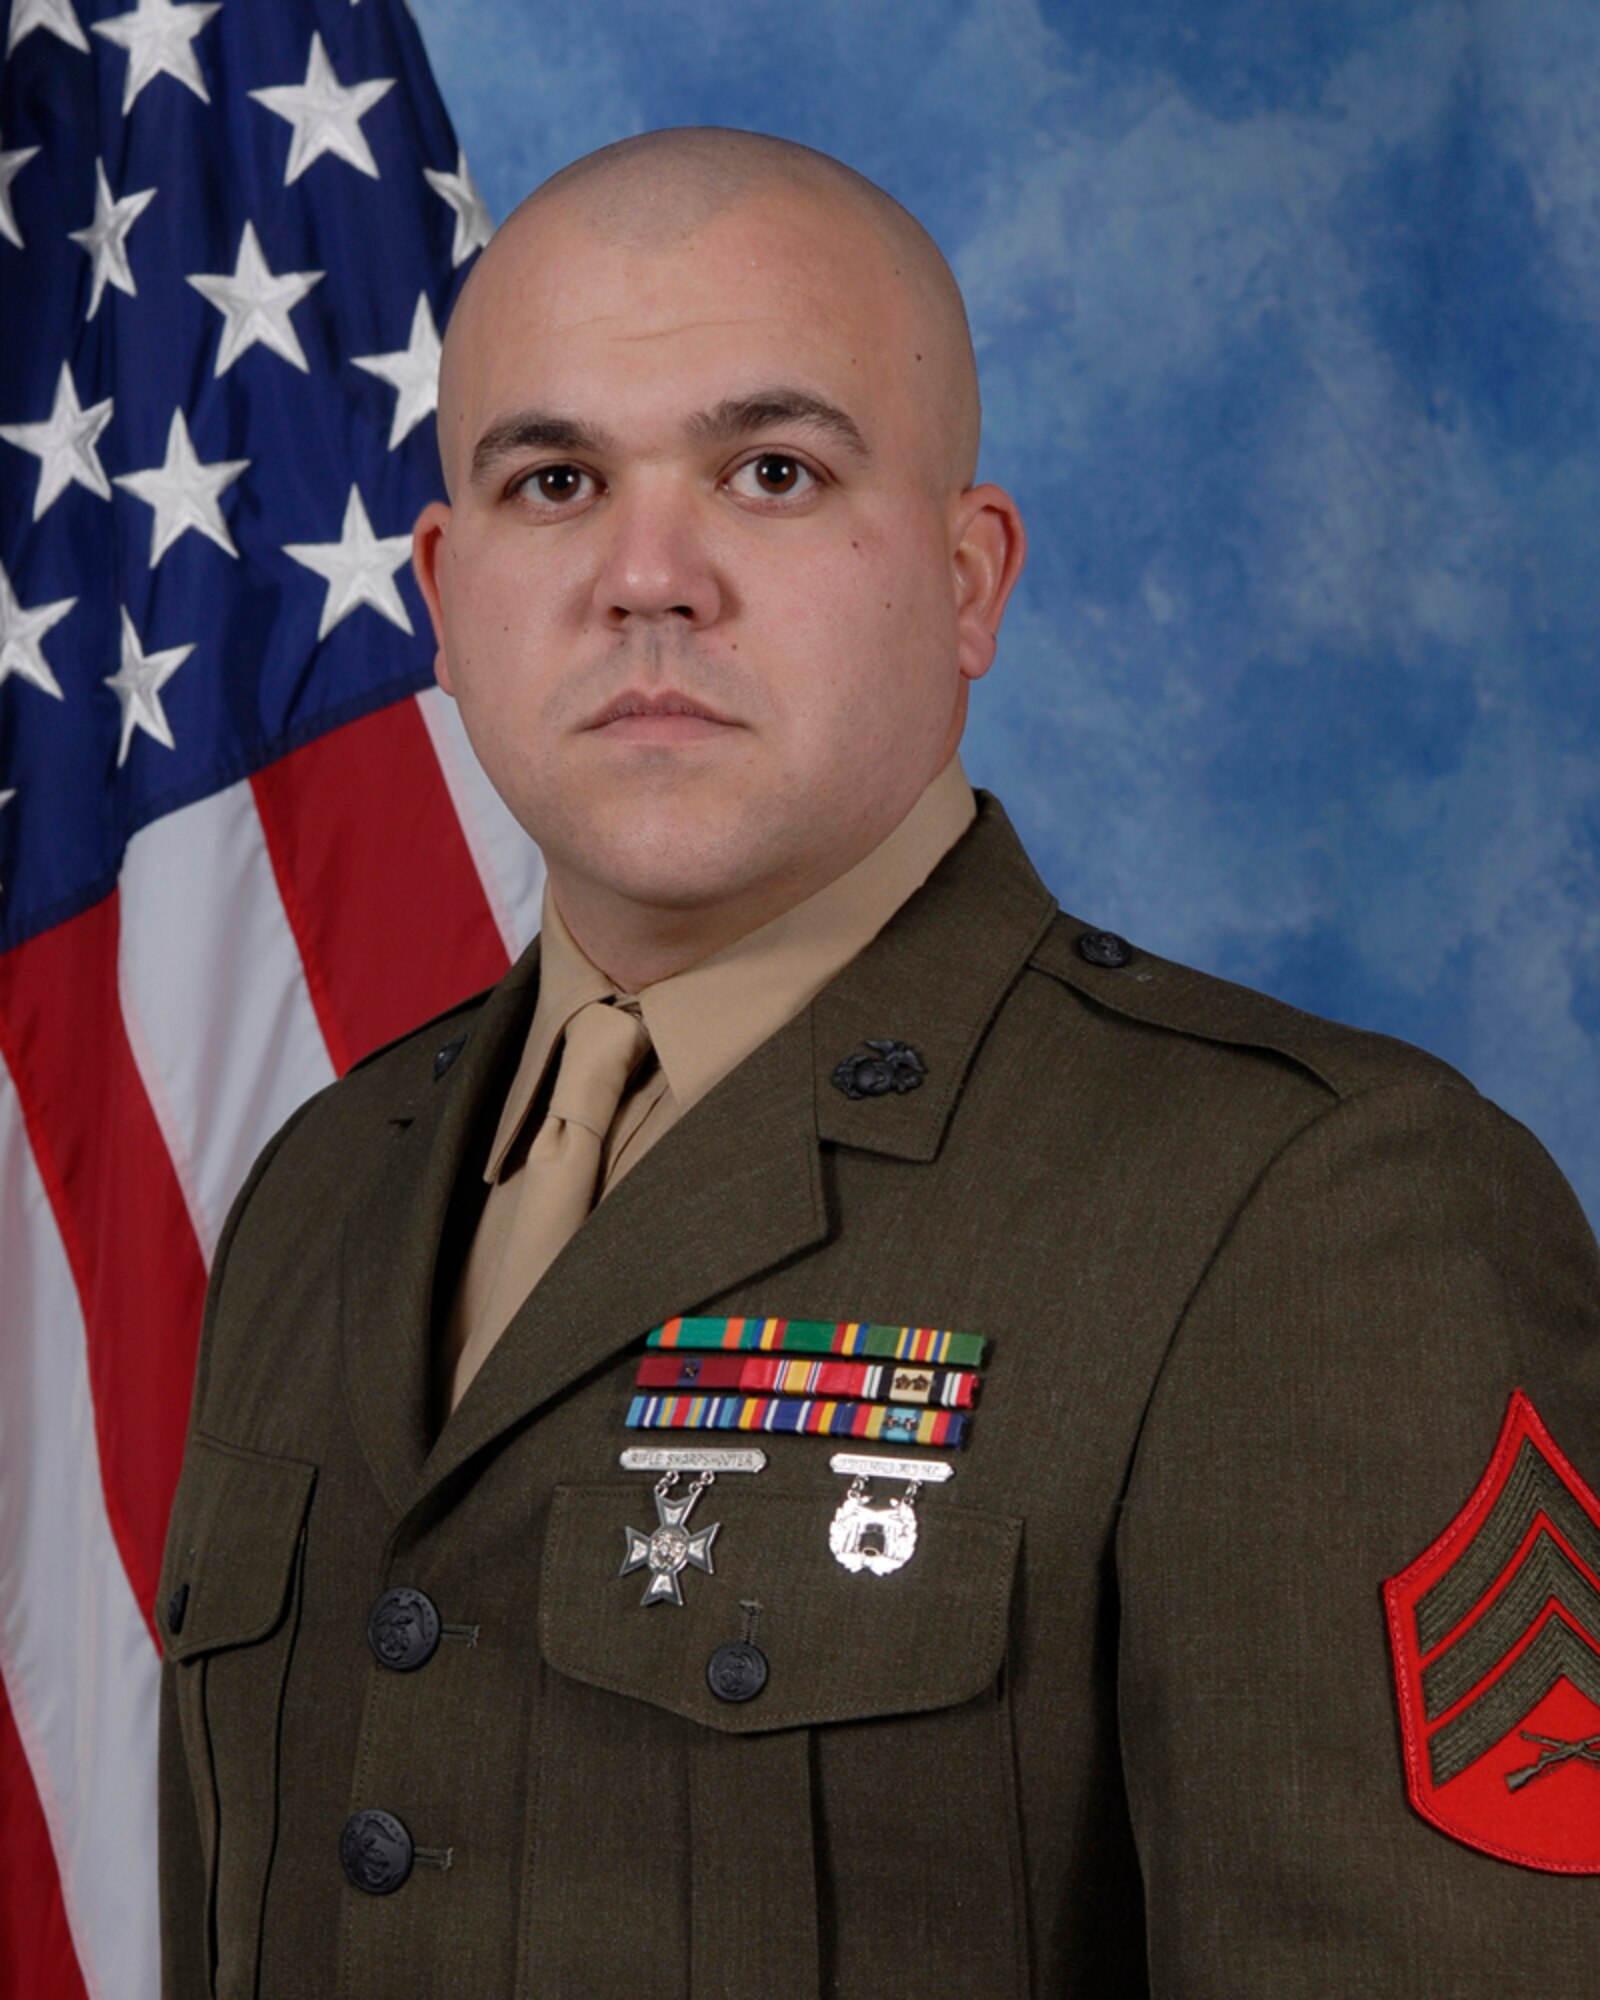 Sgt. Travis Godley, Marine Corp Detachment, is the 2009 MCD NCO of the year for the 17th Training Wing, Goodfellow AFB, Texas. The annual awards program recognizes both civilians and members in 16 categories of the Air Force, Army, Navy and Marines who are assigned to the wing, for their significant contributions to the 17 TRW, the community and mission. (U.S. Air Force photo/ Lou Czarnecki)